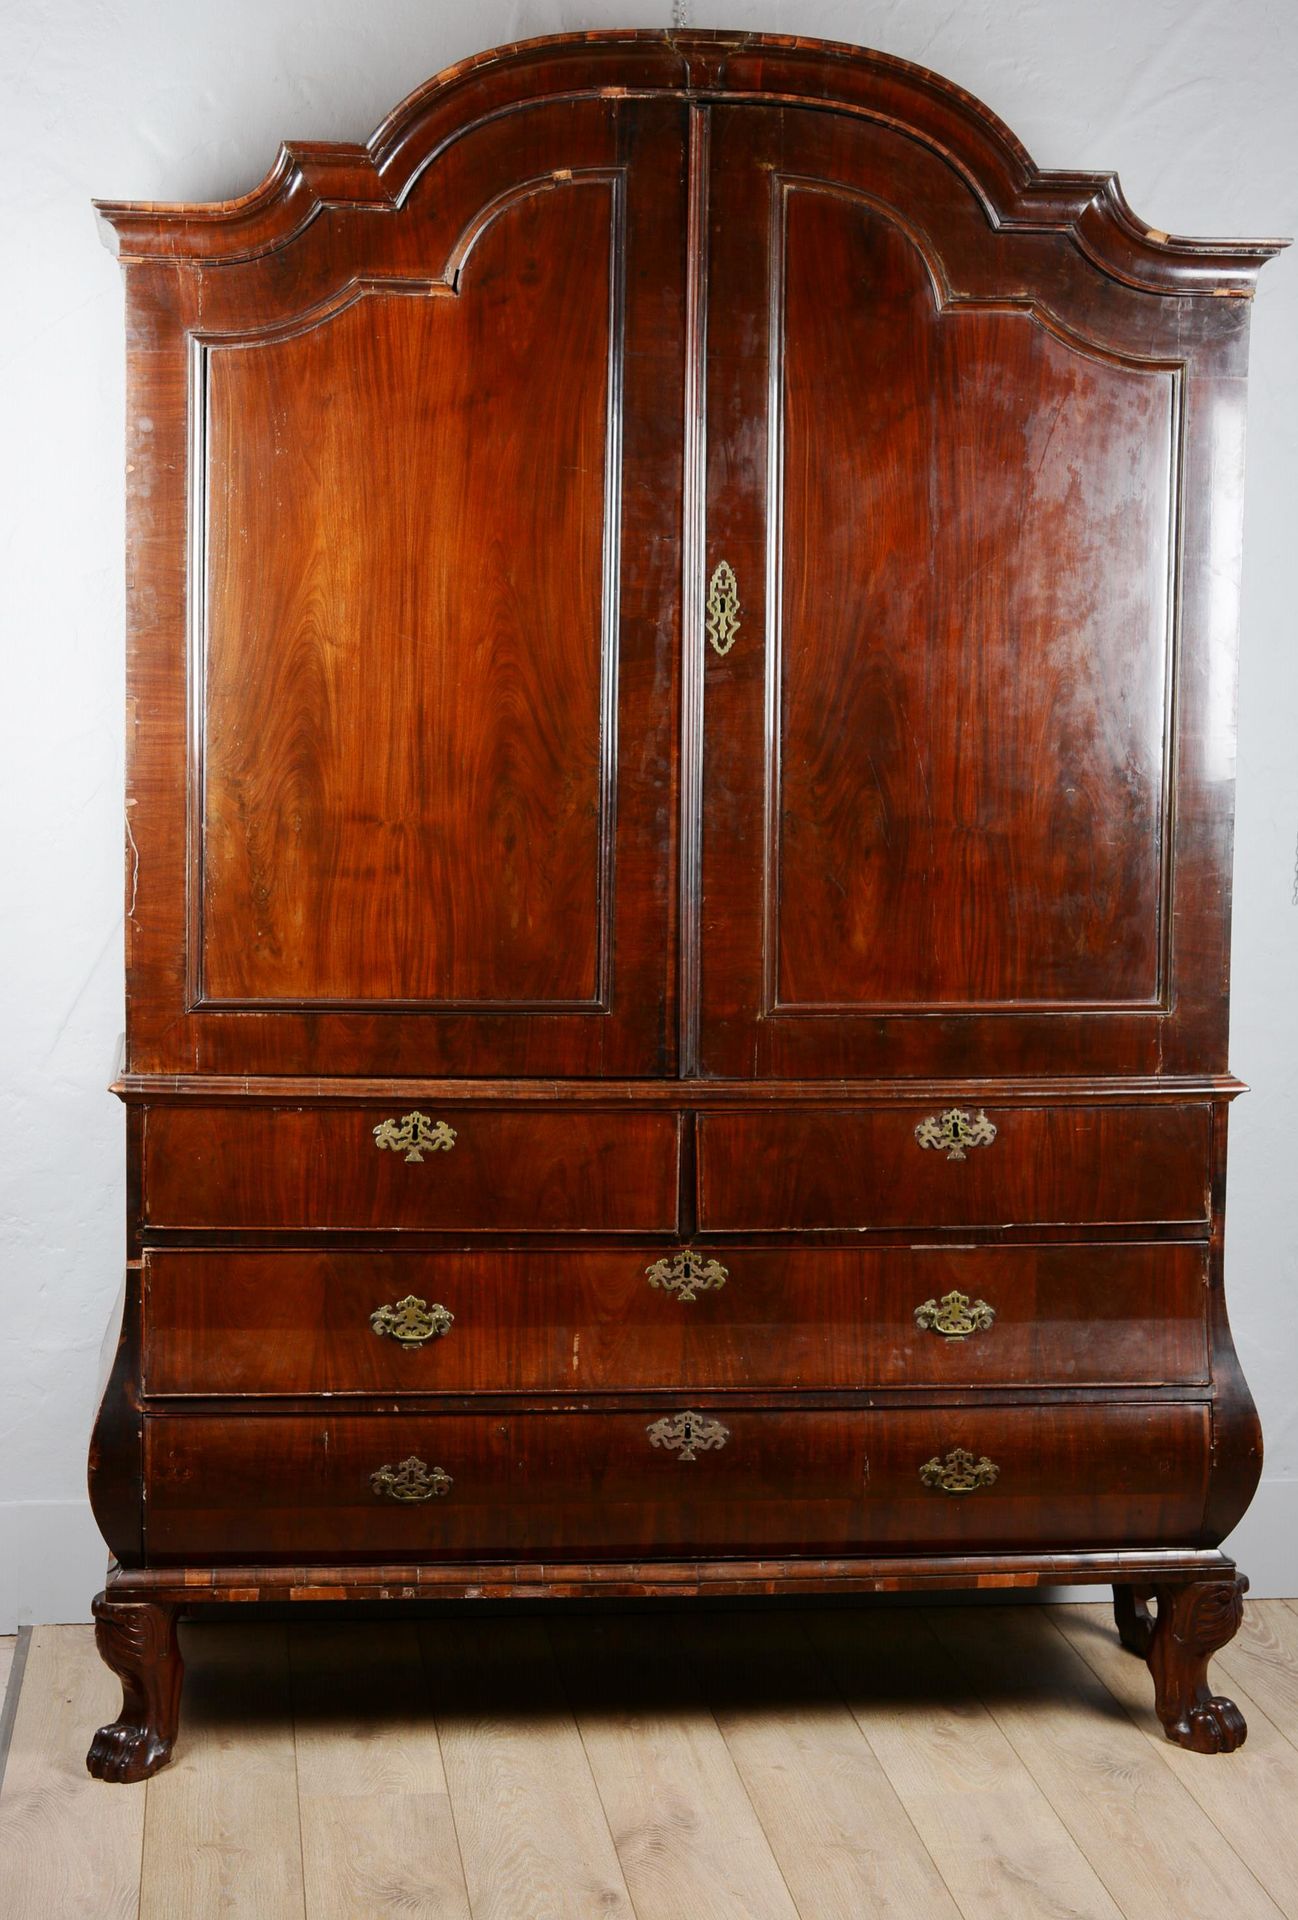 Grande argentière en acajou Large mahogany chest of drawers with three drawers a&hellip;